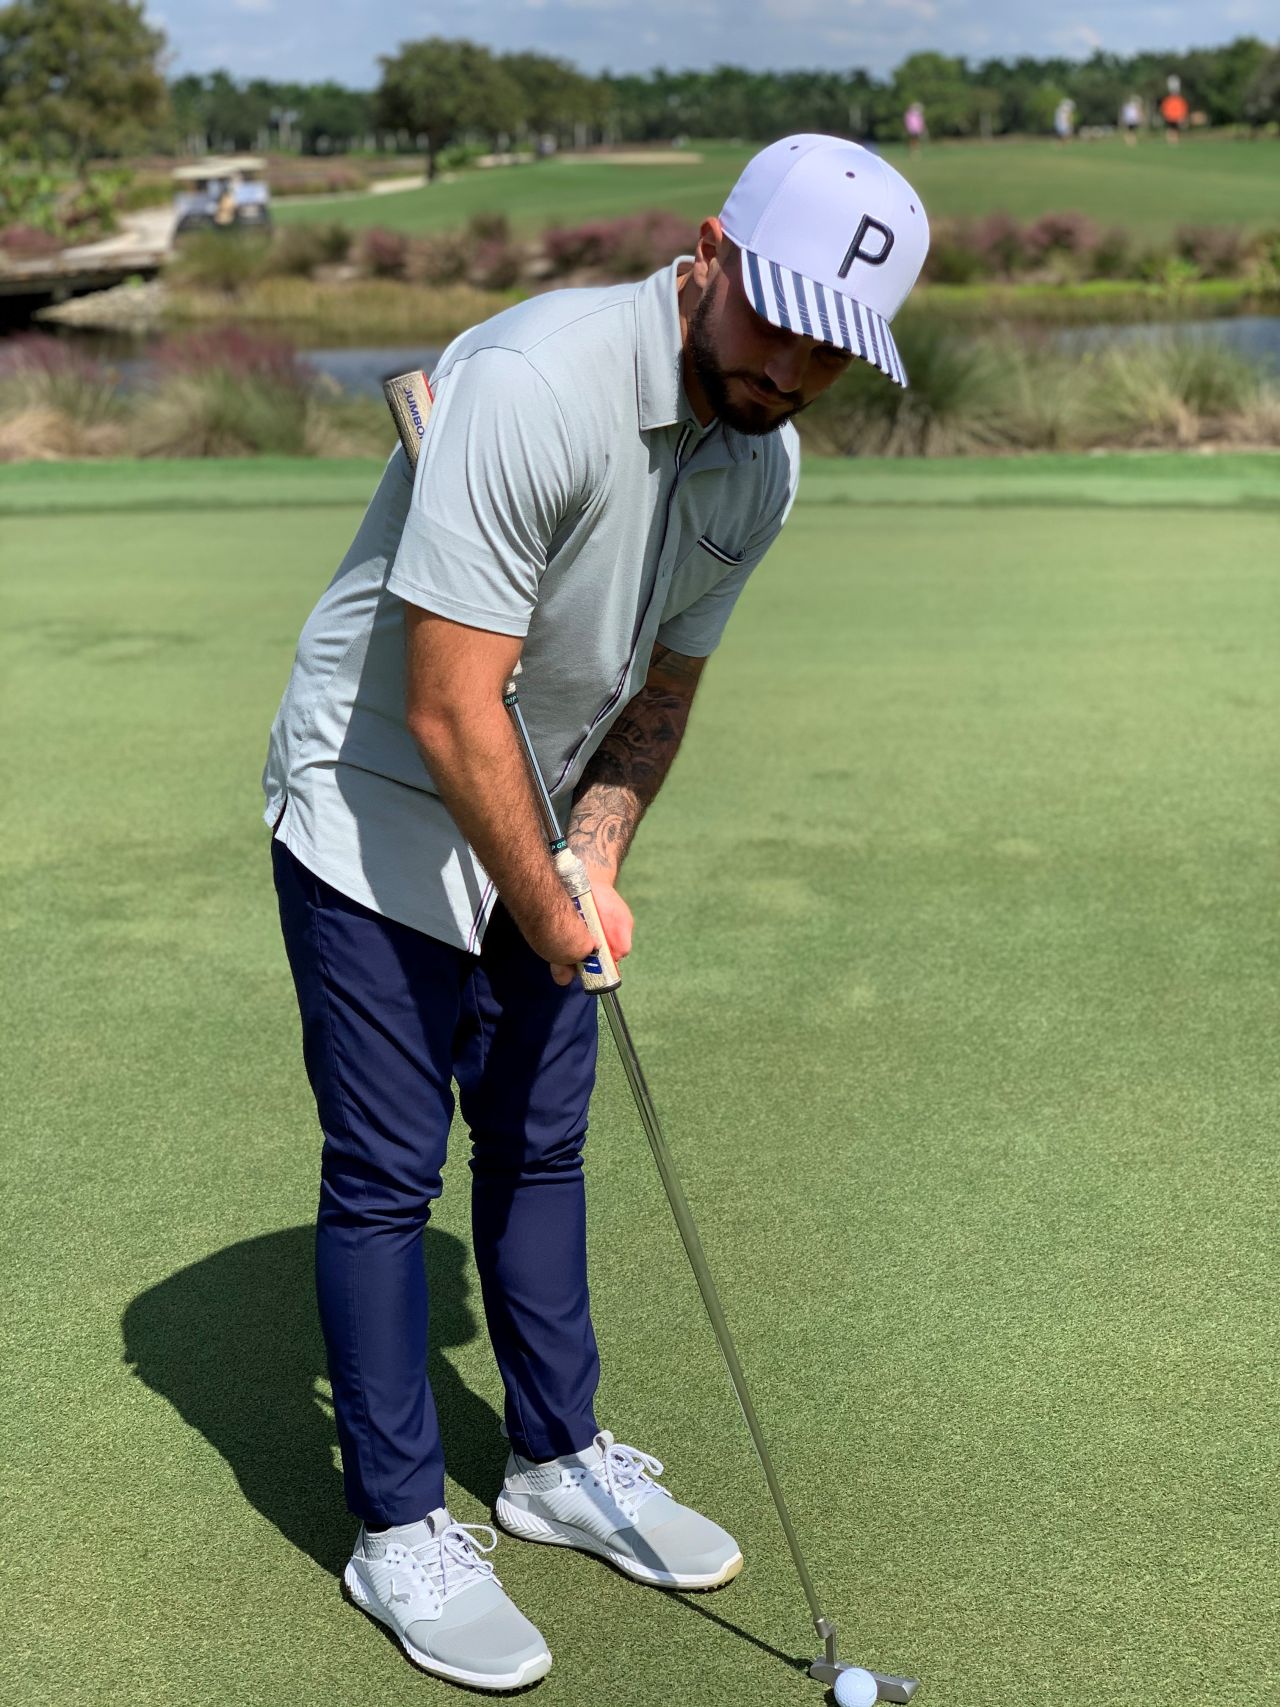 Canesi's grip has barely changed from the age of six, when he hit his first shot. His clubs are far longer than the average, and Canesi believes they can be a great training aid for budding players. "It helps you stay connected, rotating as one, and using your chest through the target," he told CNN.